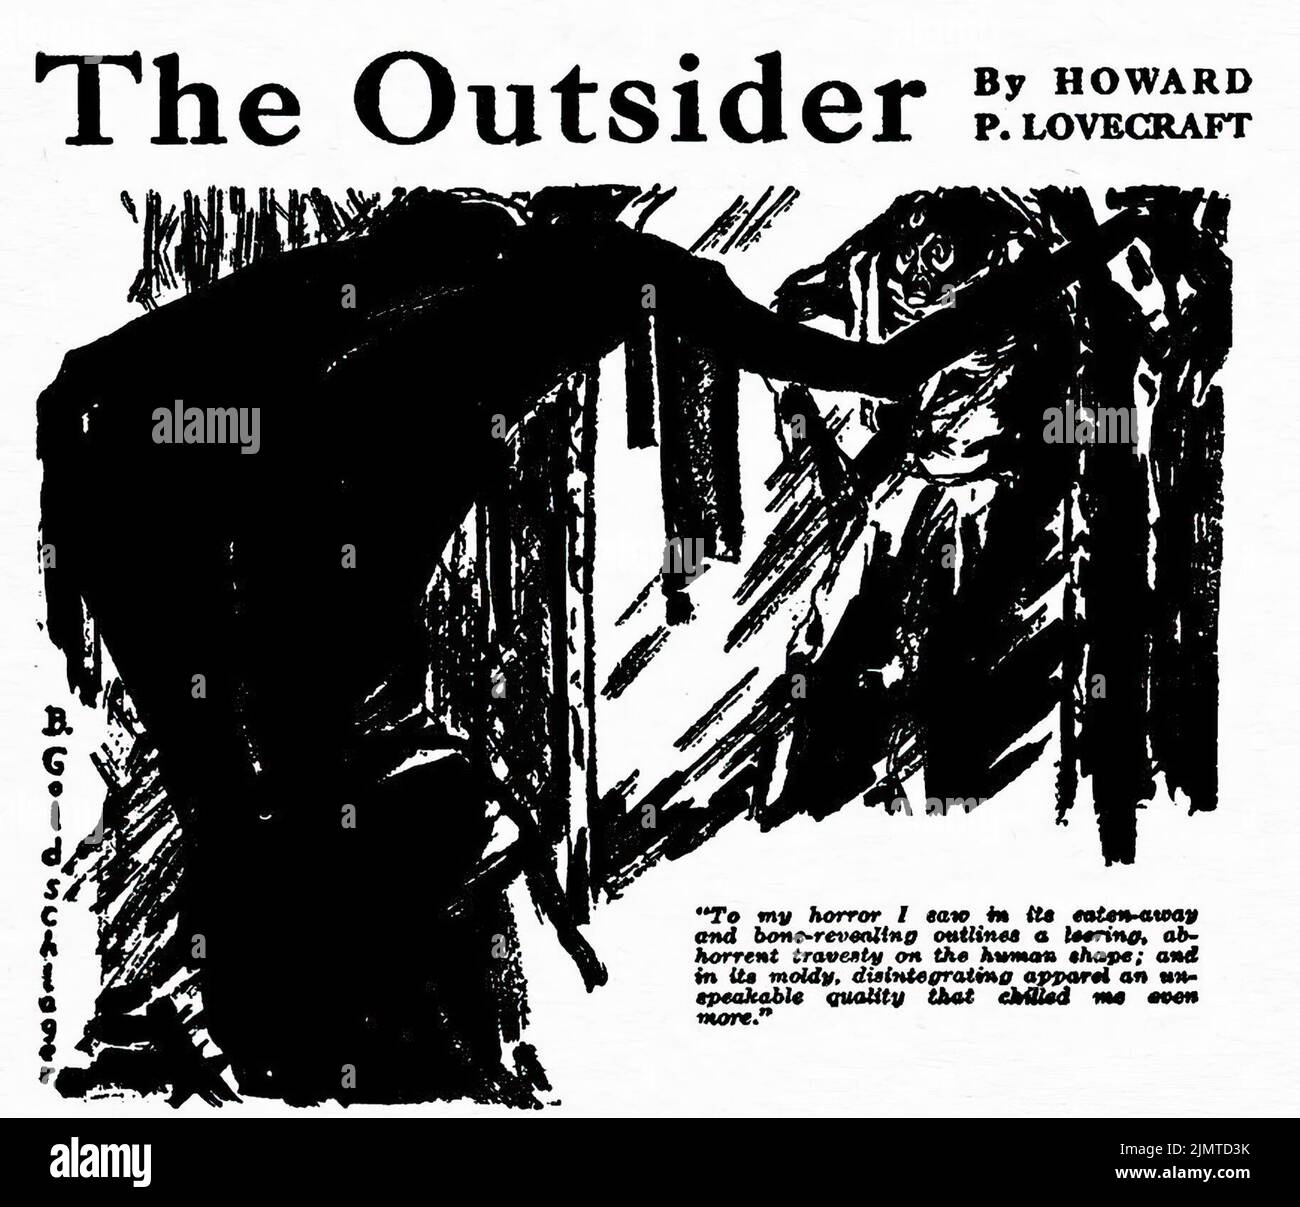 The Outsider, by H. P. Lovecraft. Illustration by B. Goldschlager from Weird Tales, April 1926 Stock Photo